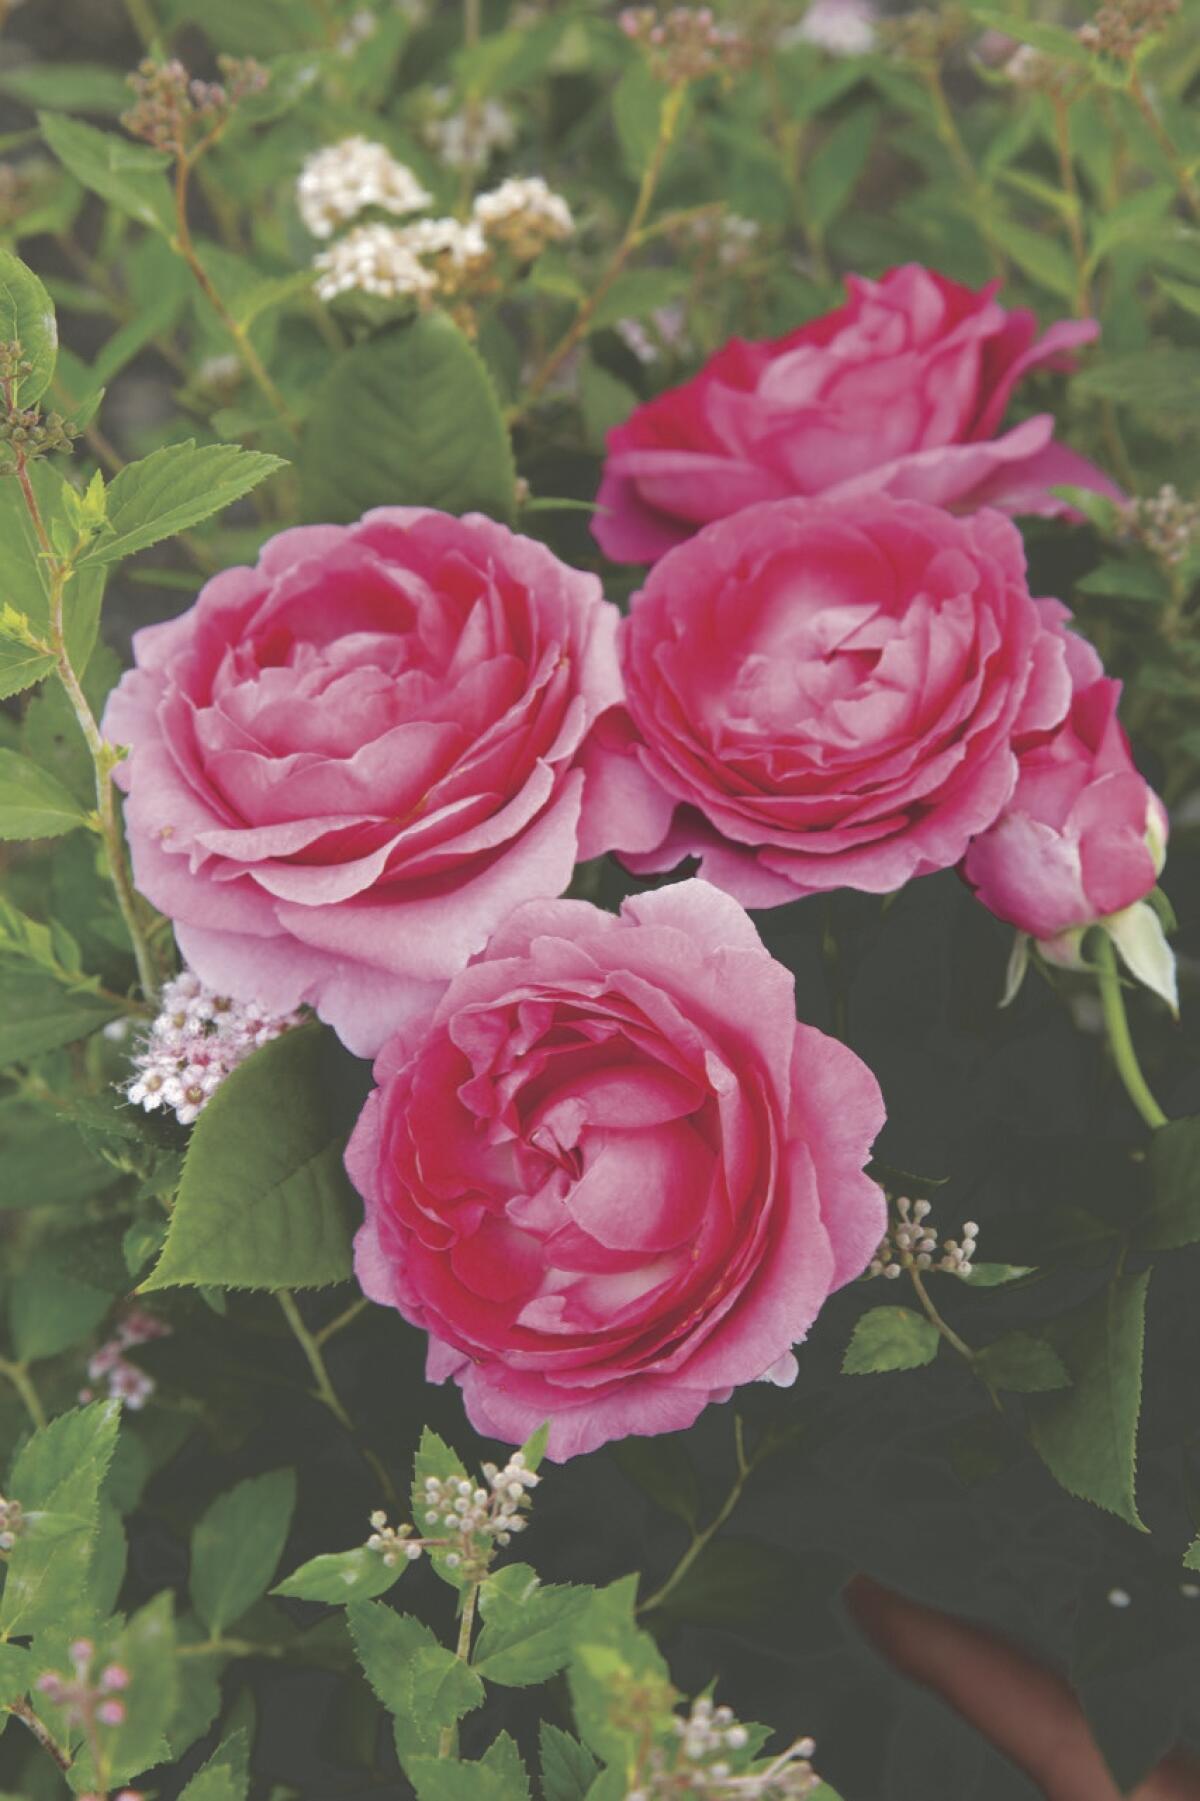 The pink blooms of ‘Raspberry Cupcake’ have large, cupcake petals.